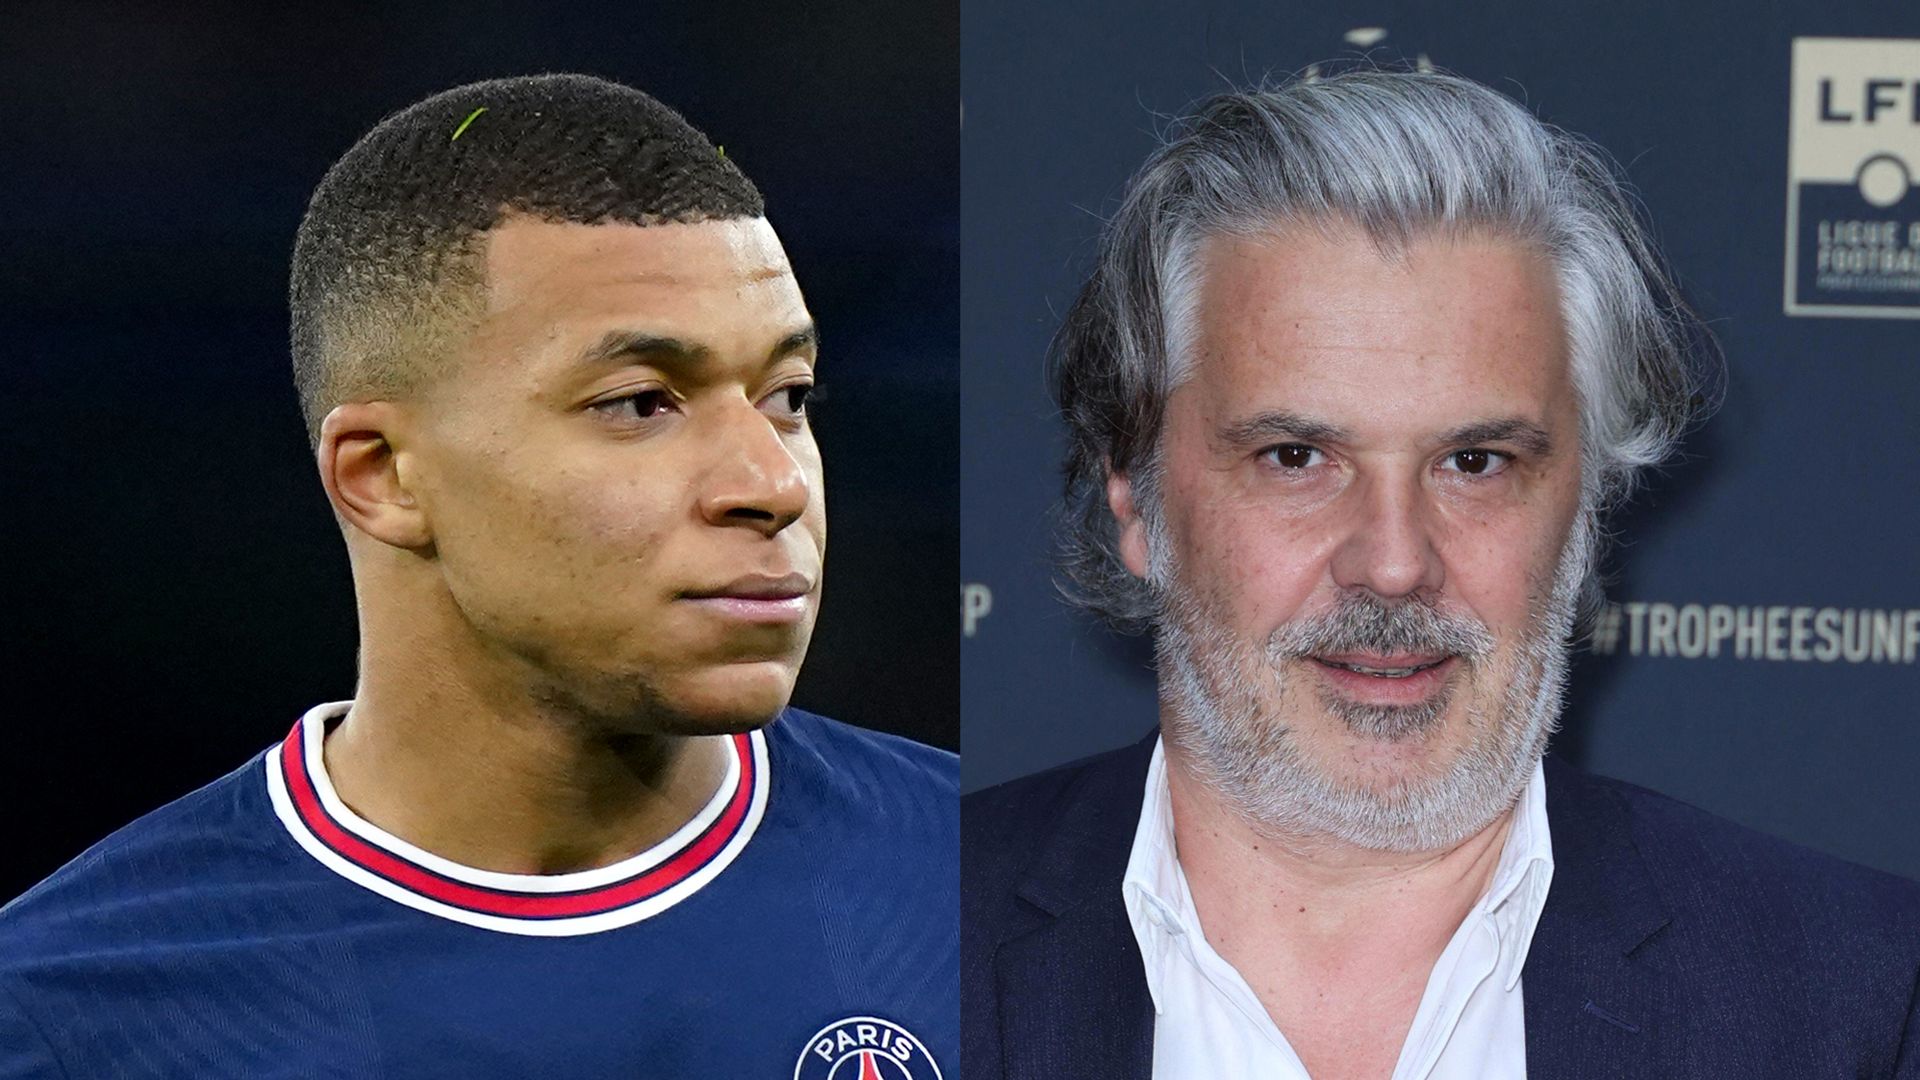 Ligue 1 chief hit outs at LaLiga's 'disrespectful smears' over Mbappe complaint